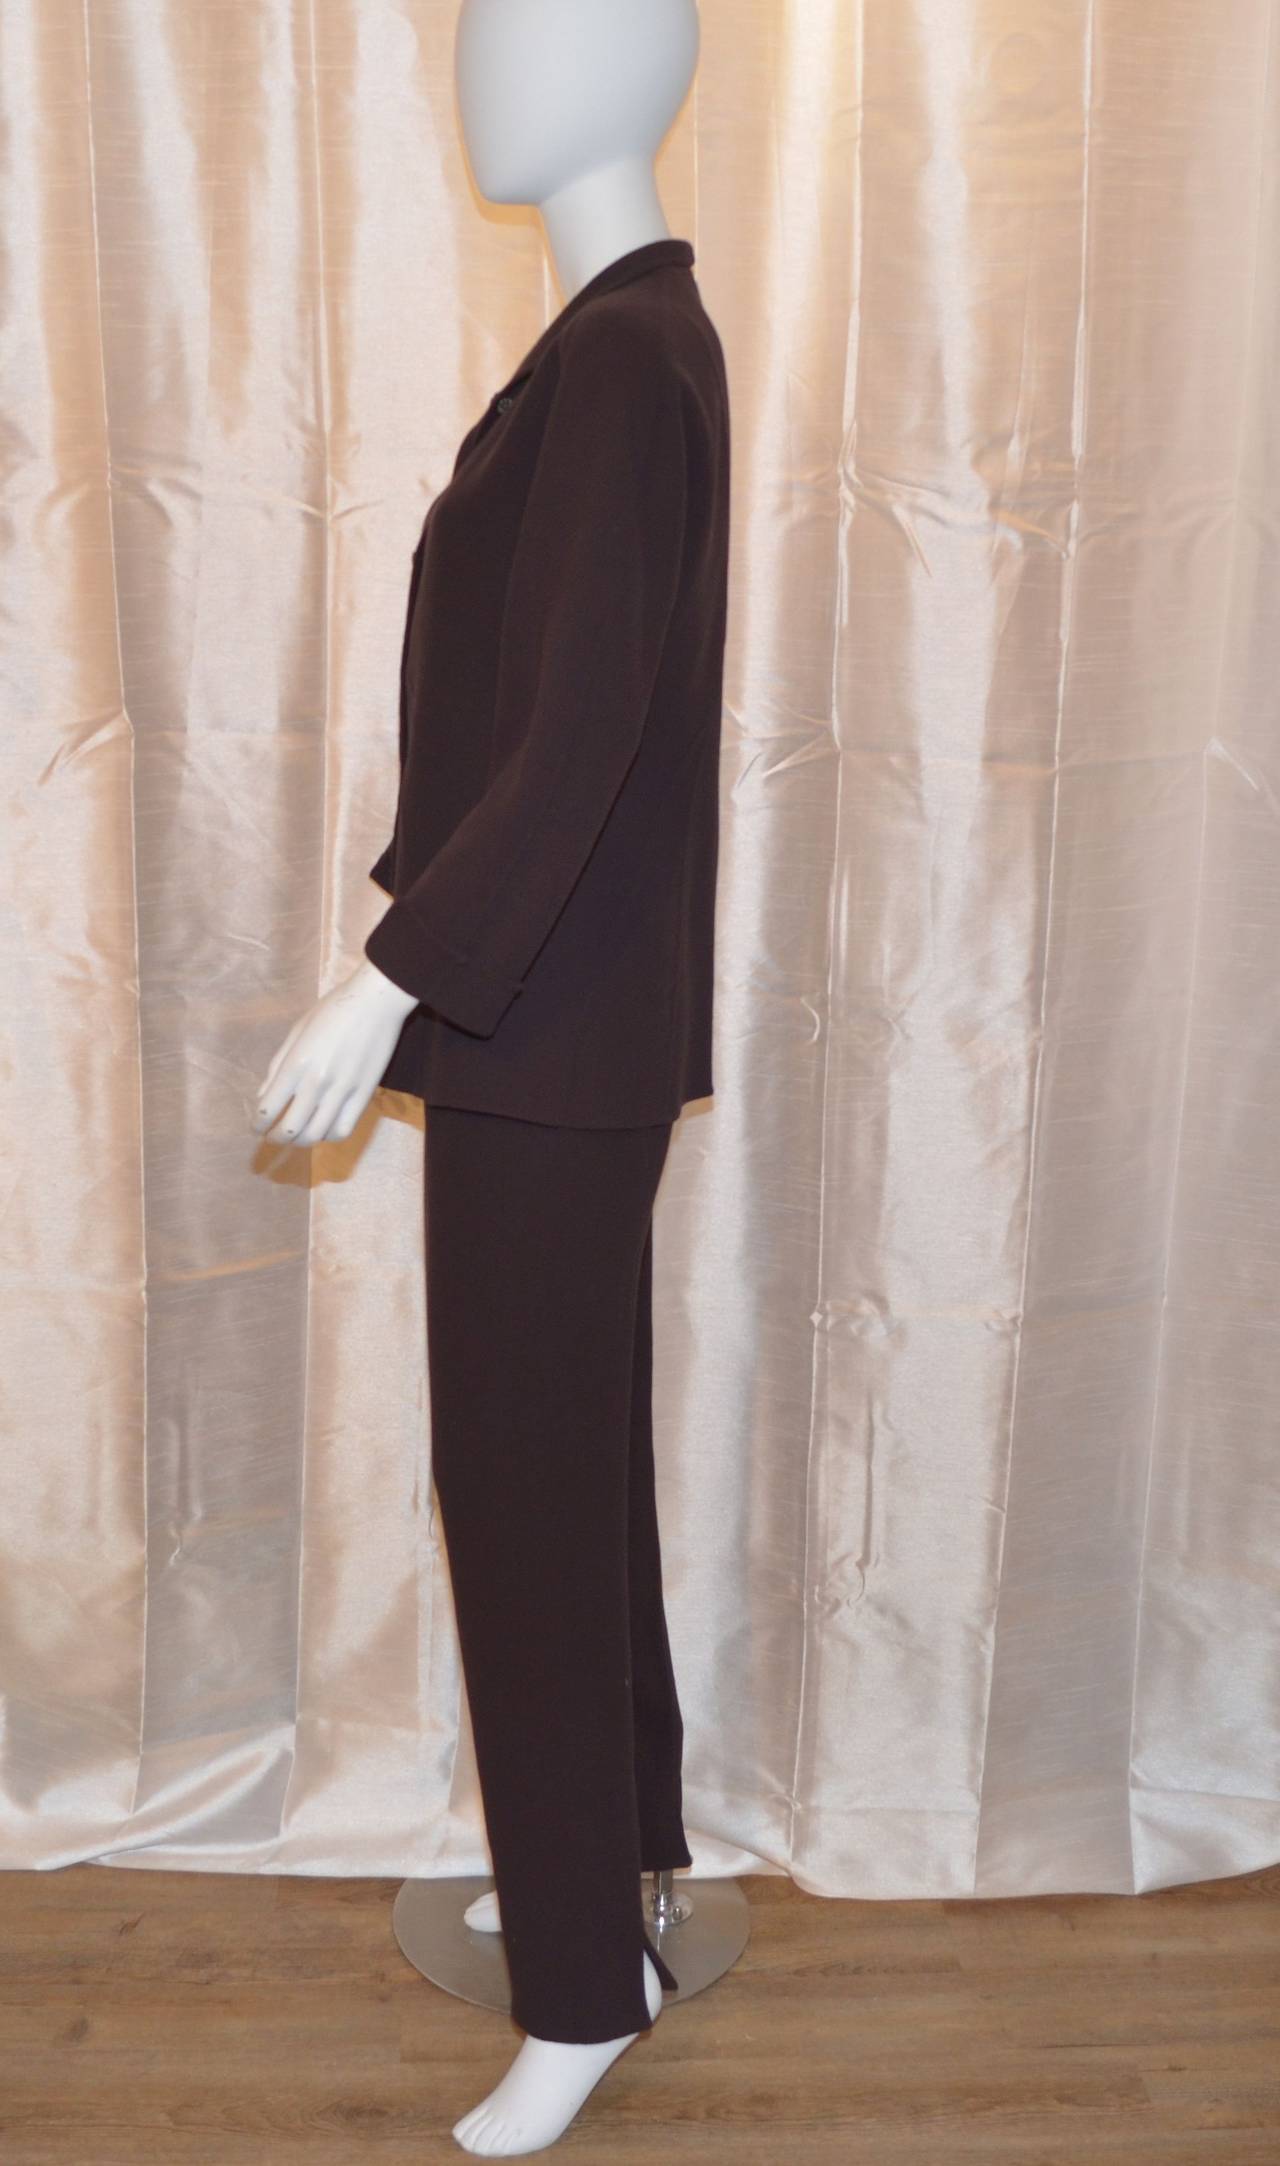 Chado Ralph Rucci Brown Wool Pant Suit In Excellent Condition In Carmel, CA